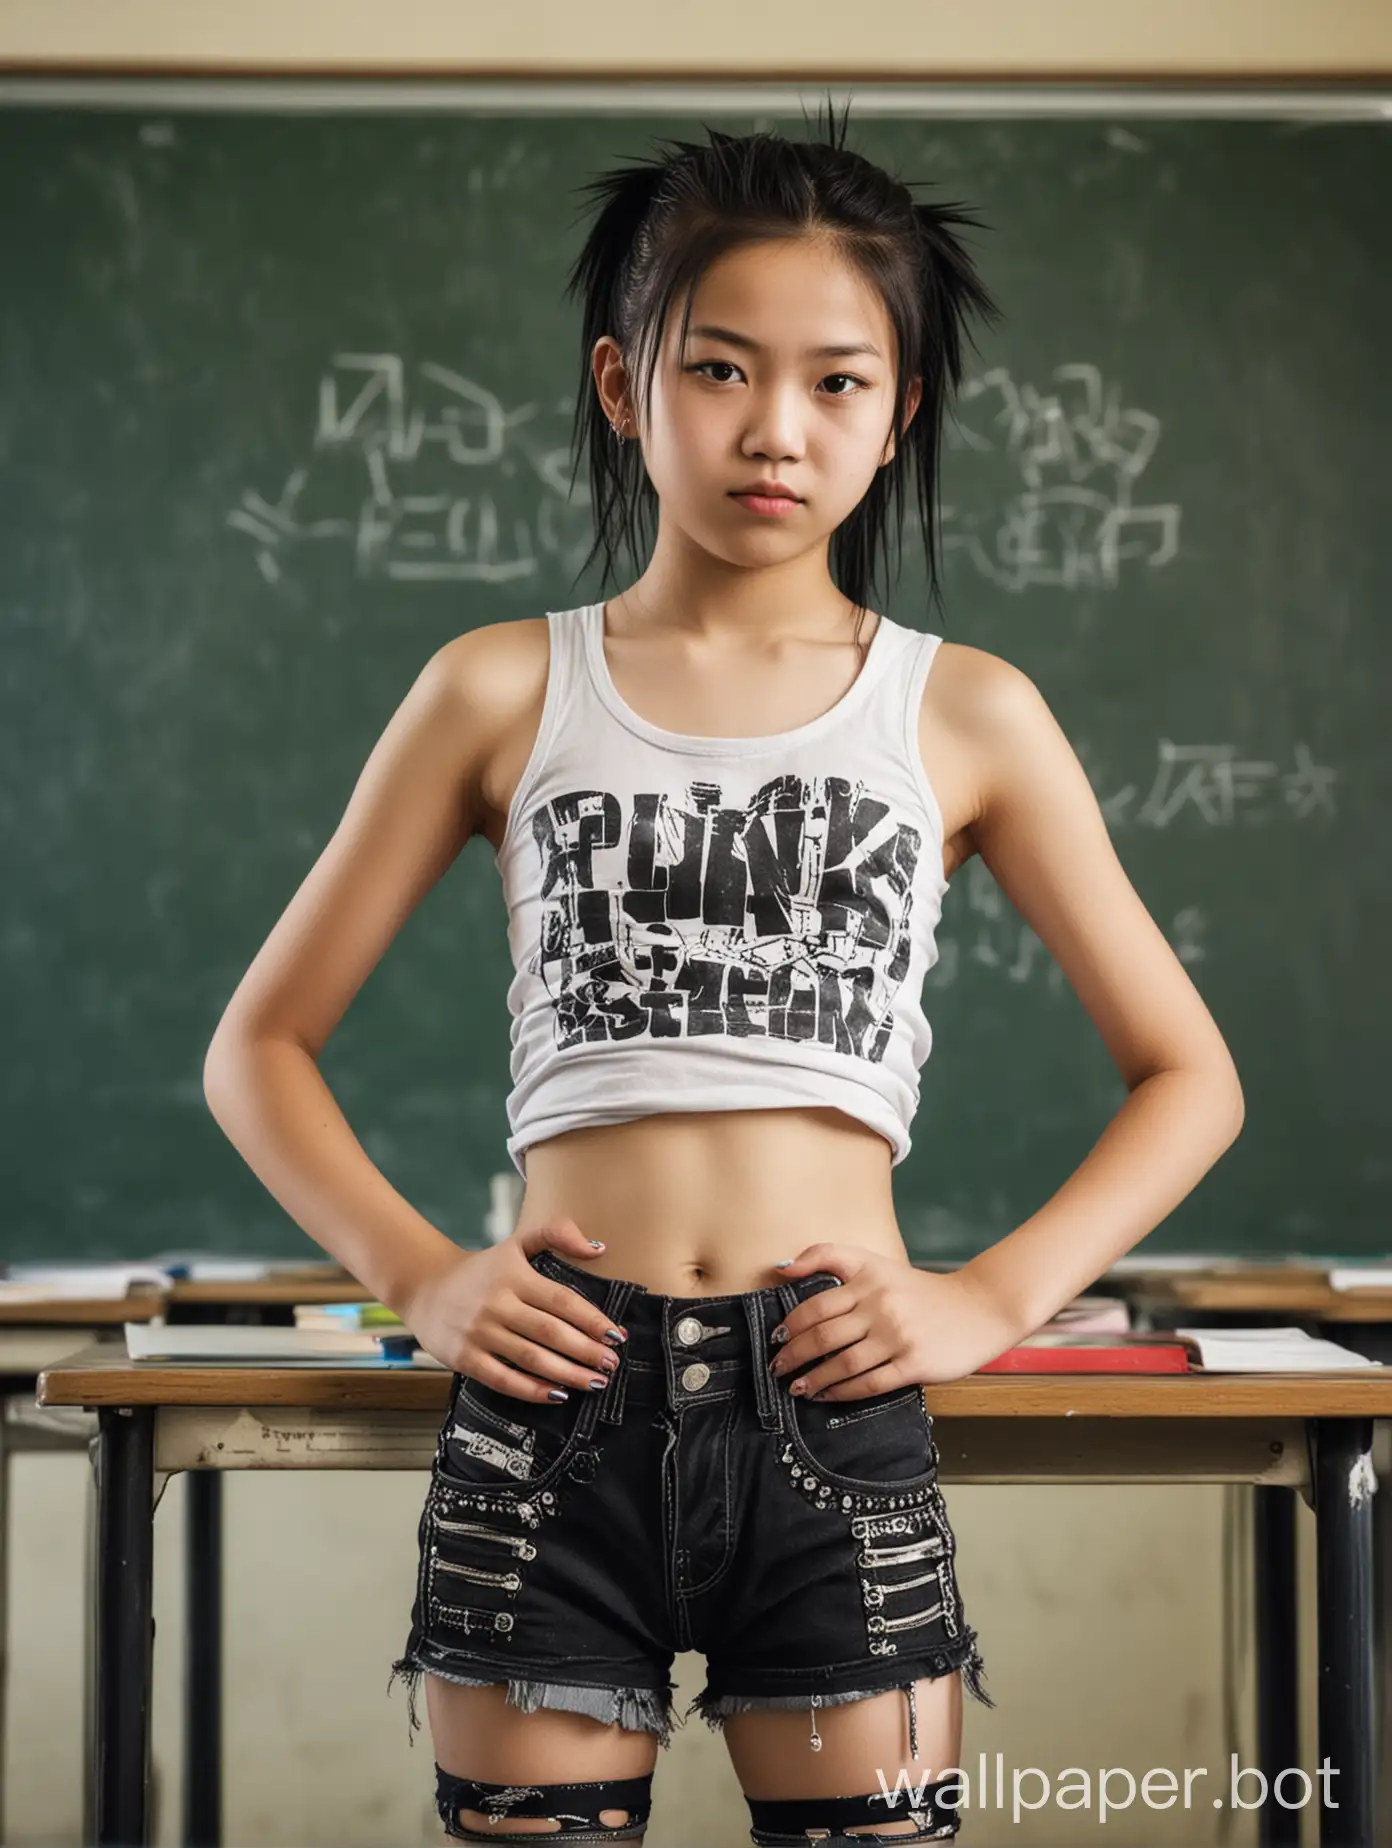 Punk-Style-13YearOld-Chinese-Girl-Posing-in-Classroom